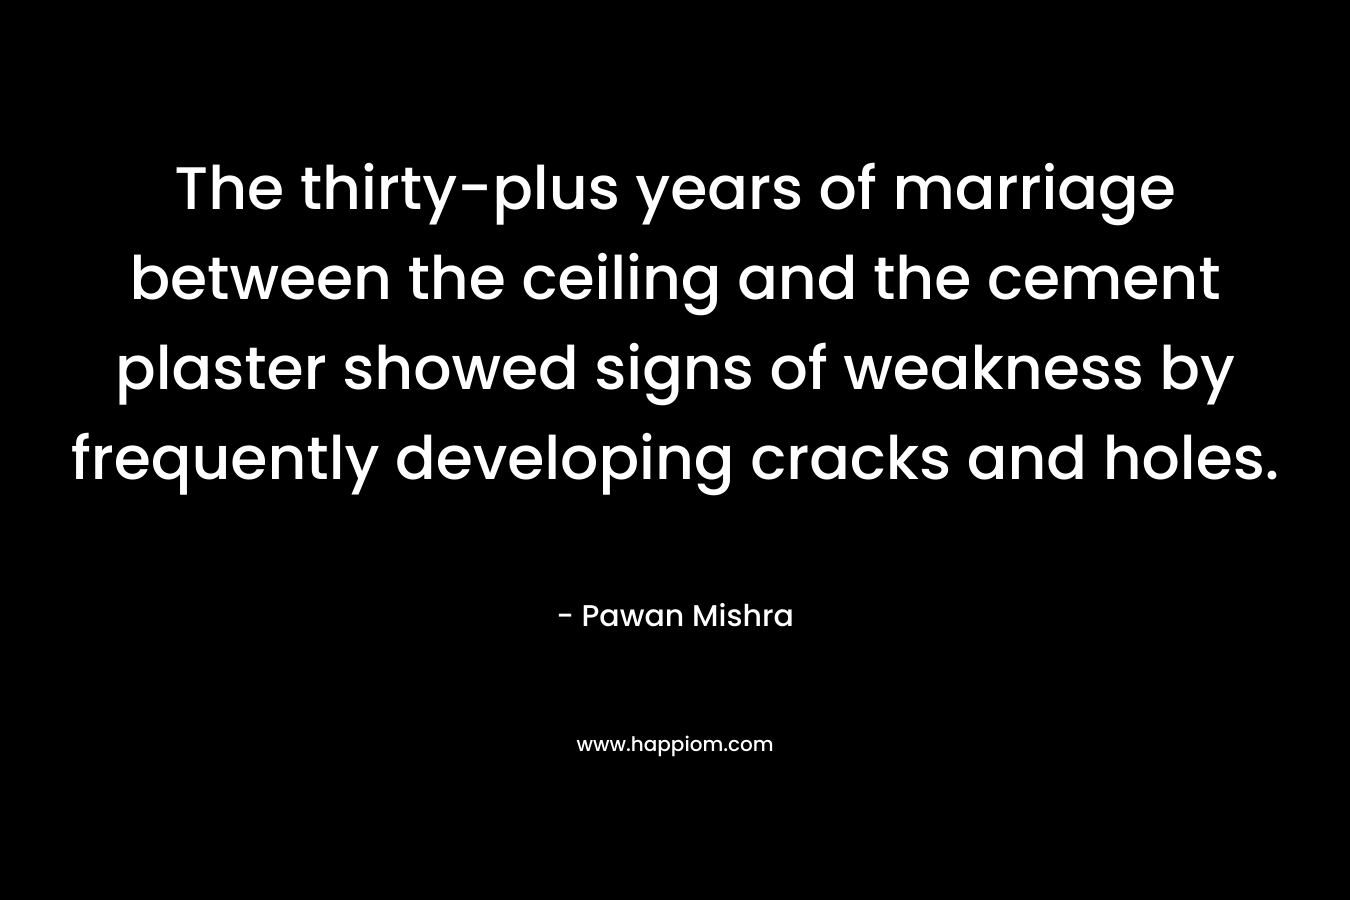 The thirty-plus years of marriage between the ceiling and the cement plaster showed signs of weakness by frequently developing cracks and holes.